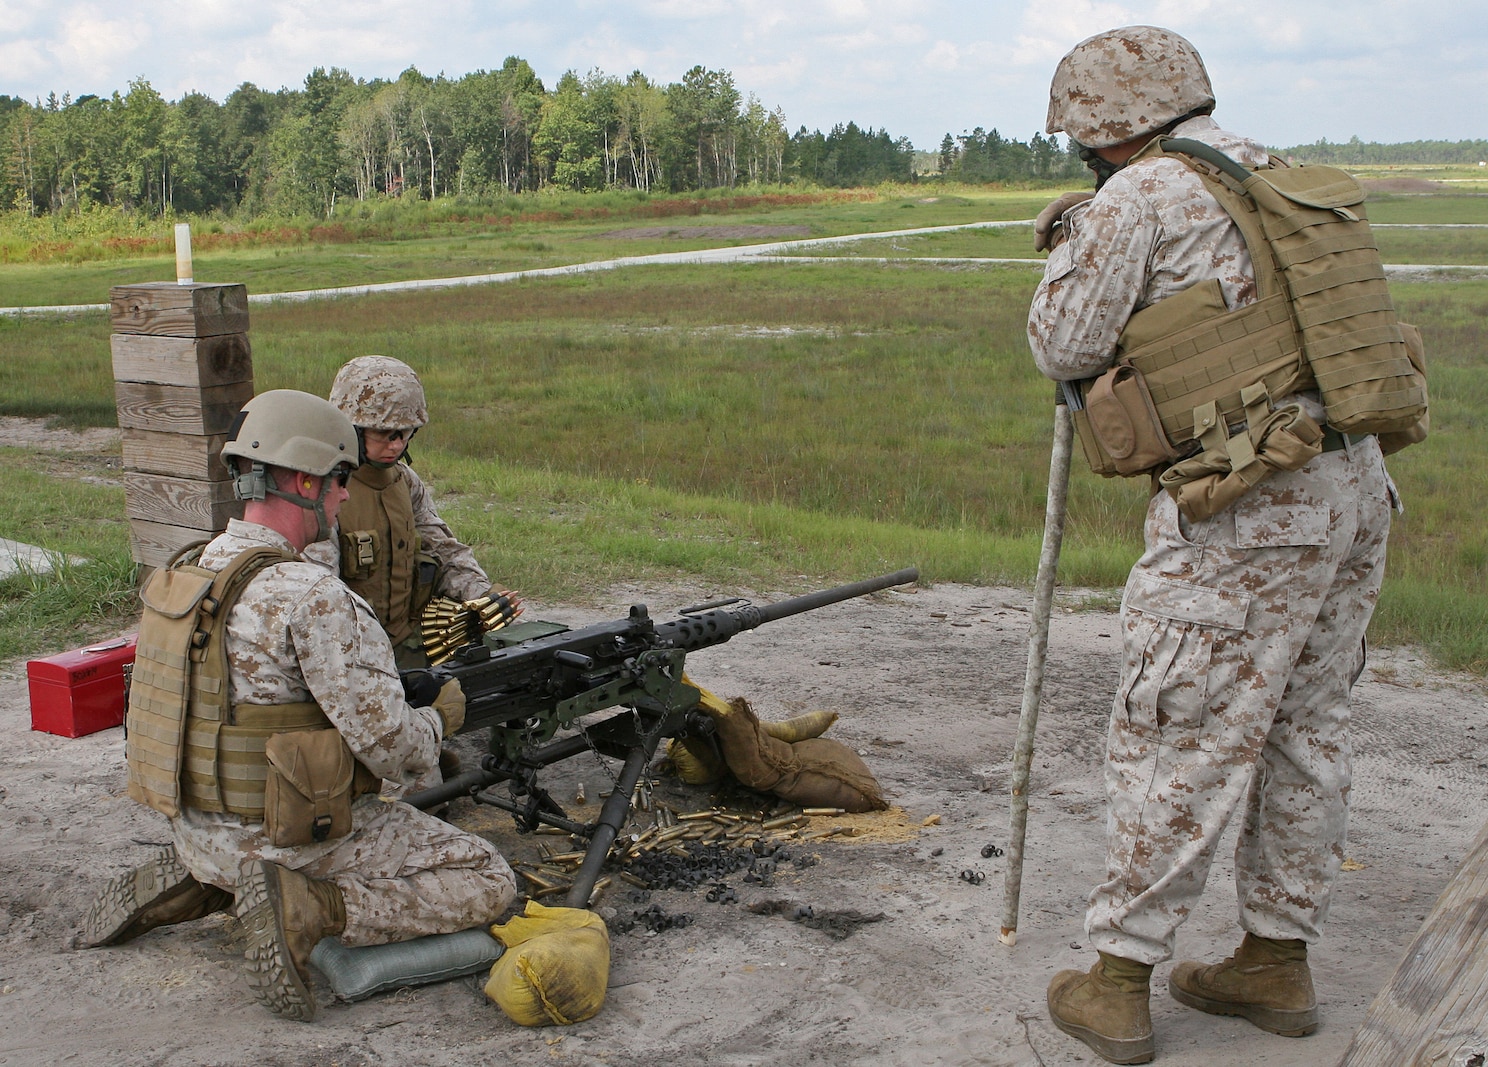 Gunnery Sgt. William Abernathy, the company first sergeant for Military Police Support Comapny, II Marine Expeditionary Force Headquarters Group supervises two Marines in loading and firing a .50 caliber Browning machine gun aboard Marine Corps Base Camp Lejeune, N.C., Aug. 28, 2010. Abernathy uses the stick he is leaning on to get the attention of his Marines when the sounds of the machine guns drown out his voice.